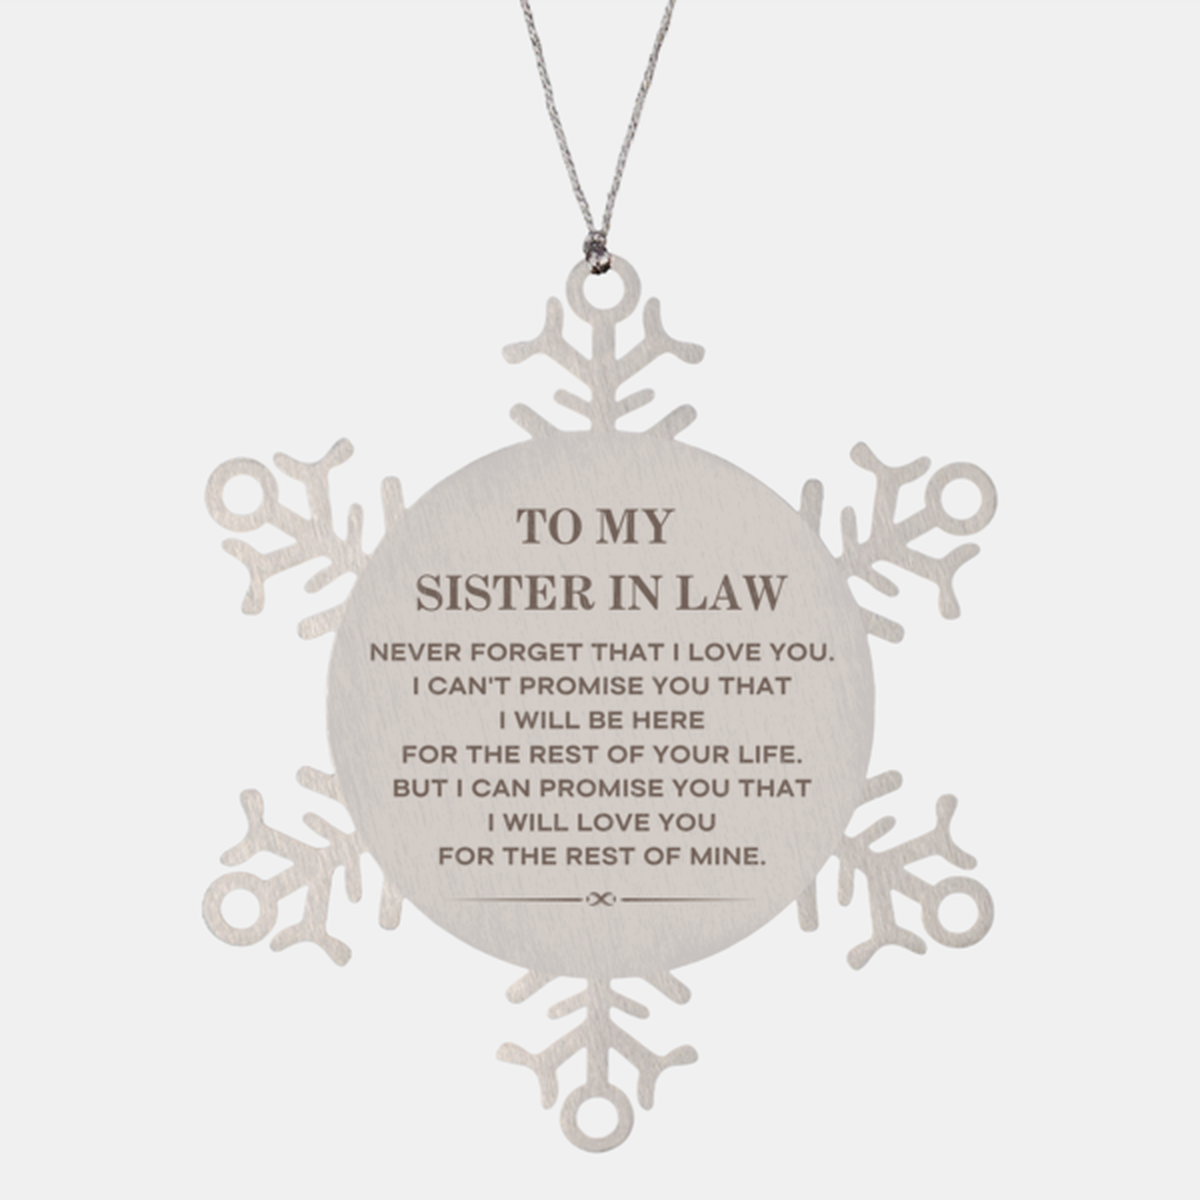 To My Sister In Law Gifts, I will love you for the rest of mine, Love Sister In Law Ornament, Birthday Christmas Unique Snowflake Ornament For Sister In Law